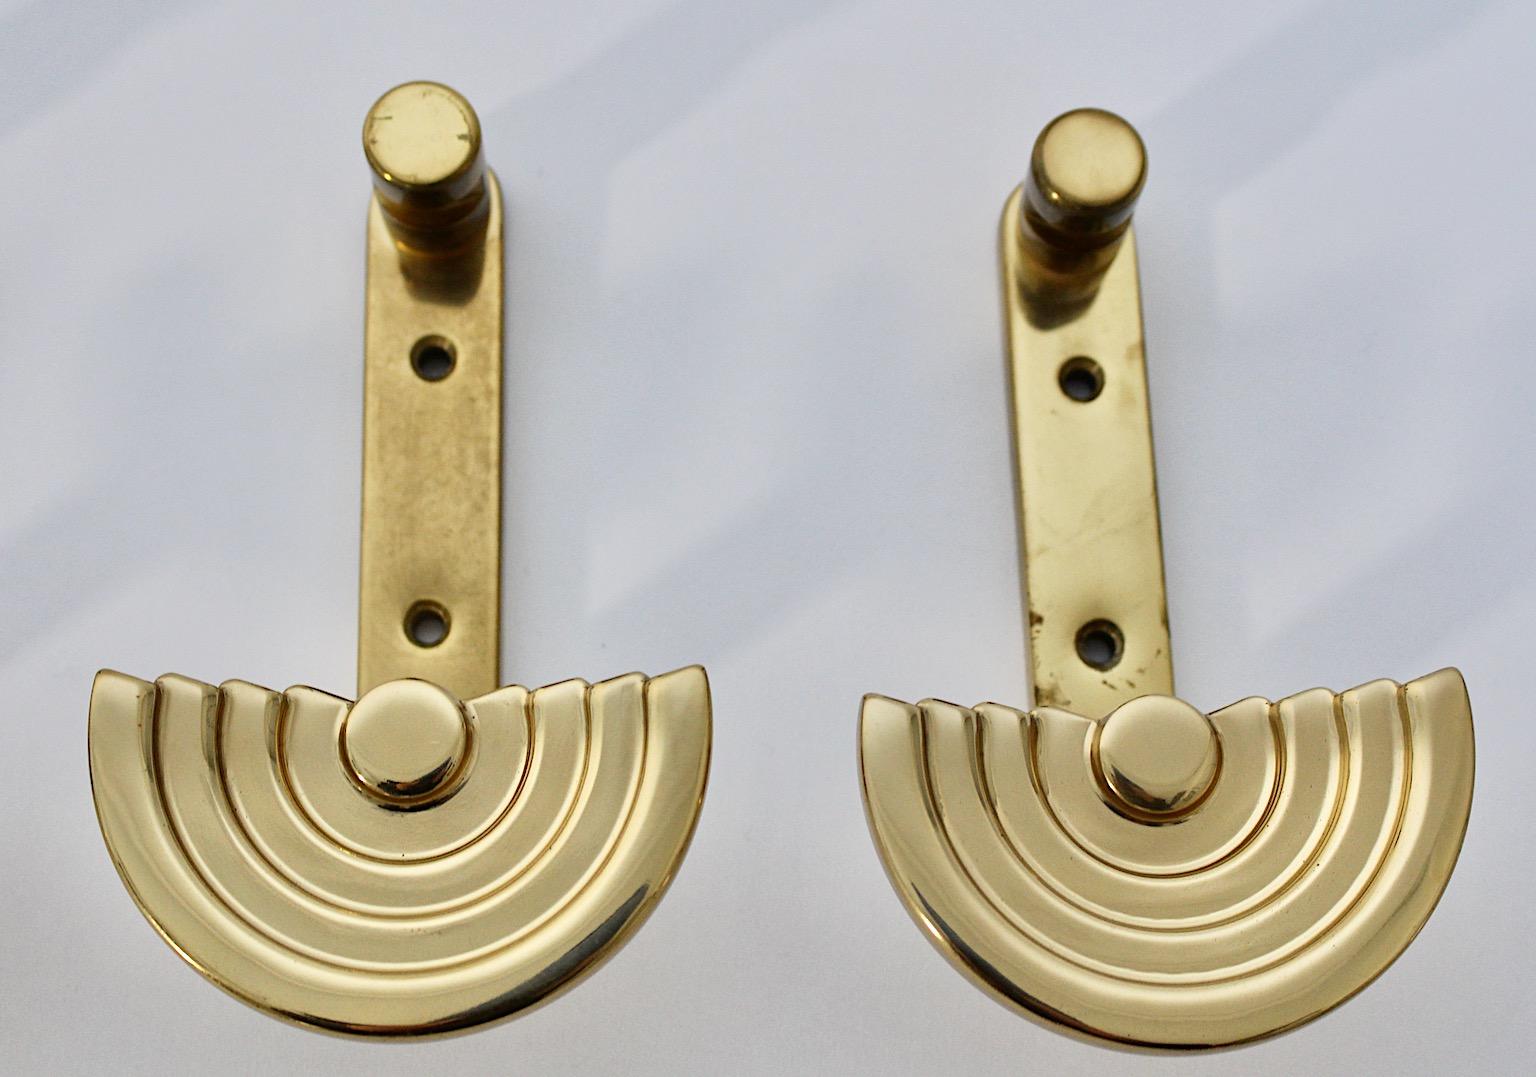 Ettore Sottsass Vintage Brass Four Wall Hooks or Coat Hooks circa 1985 Italy For Sale 5